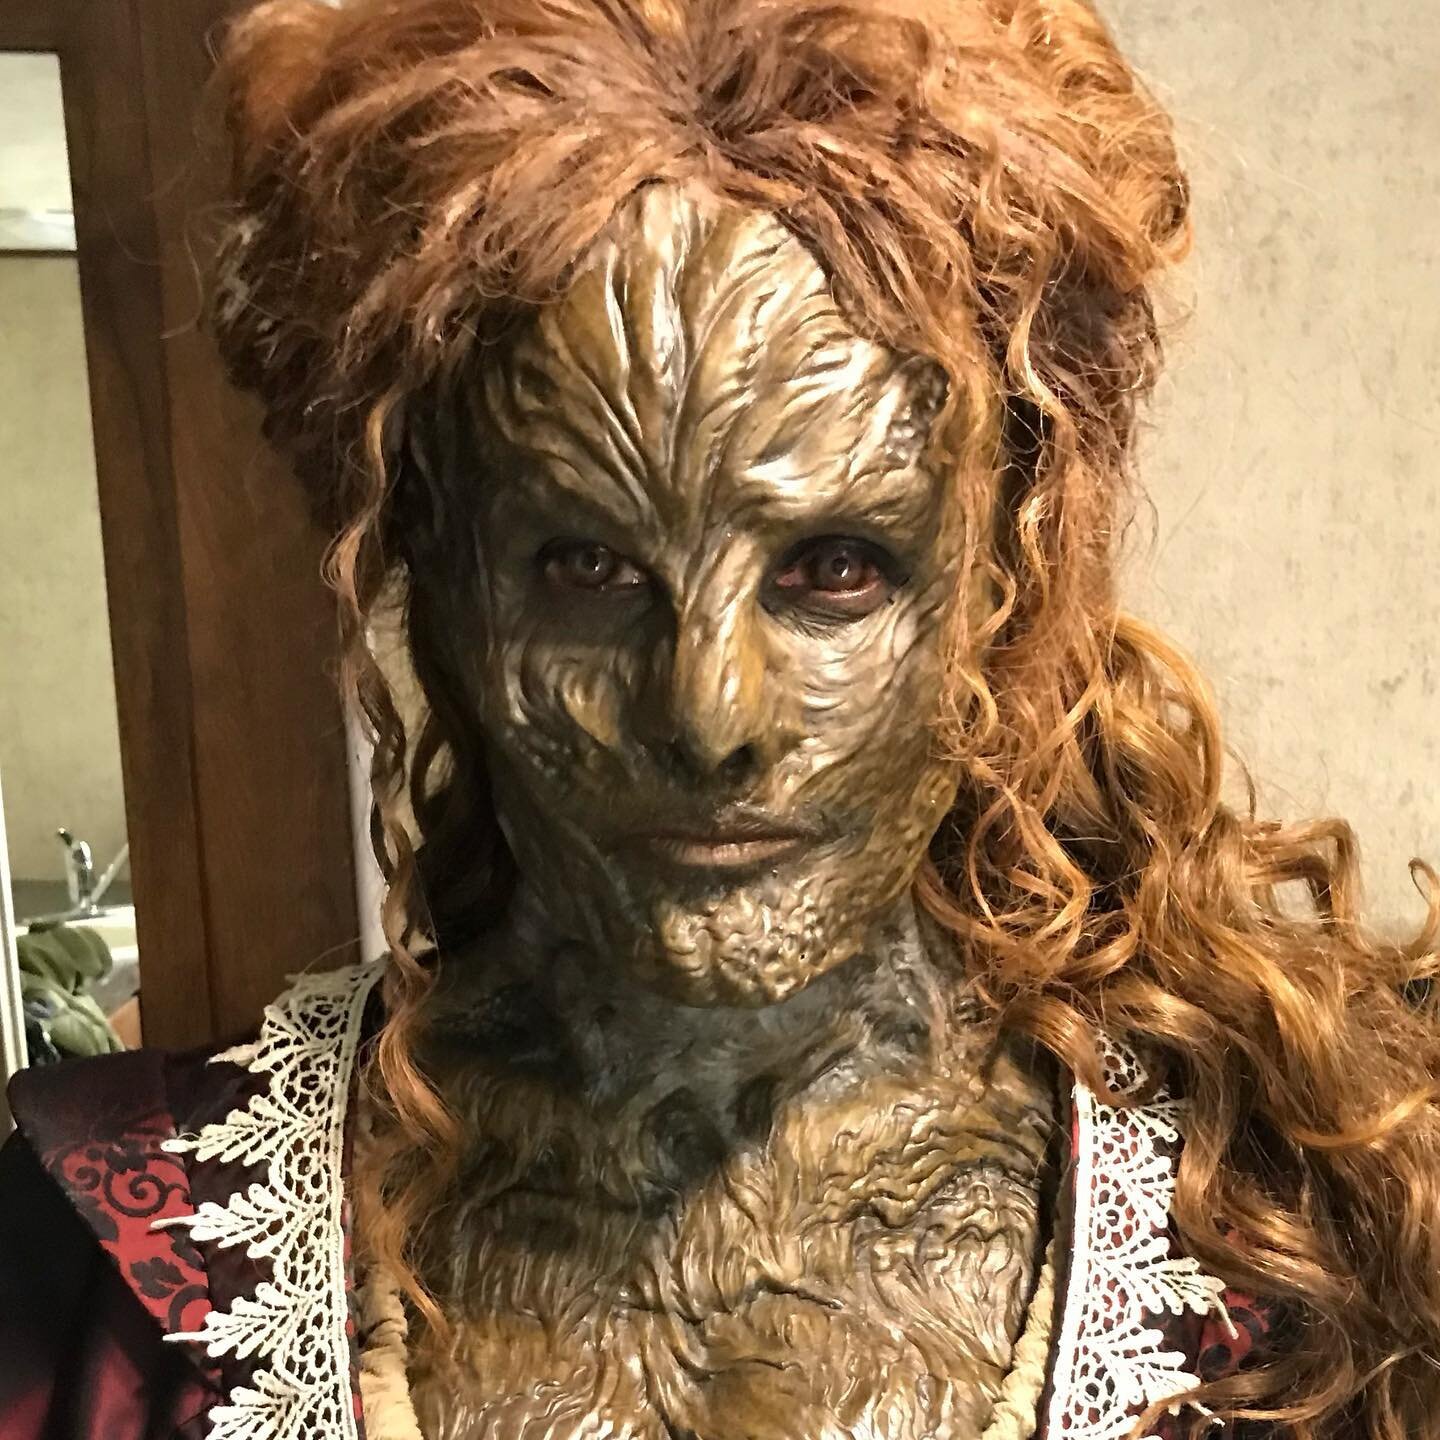 Siobhan Finneran as Morax in Dr Who from the first Jodie Whittaker series. 2019 I think? 
Here&rsquo;s the finished makeup, hair and costume from the my last post. 
These foam prosthetics were sculpted by the legend that is Gary Pollard, I think @mik